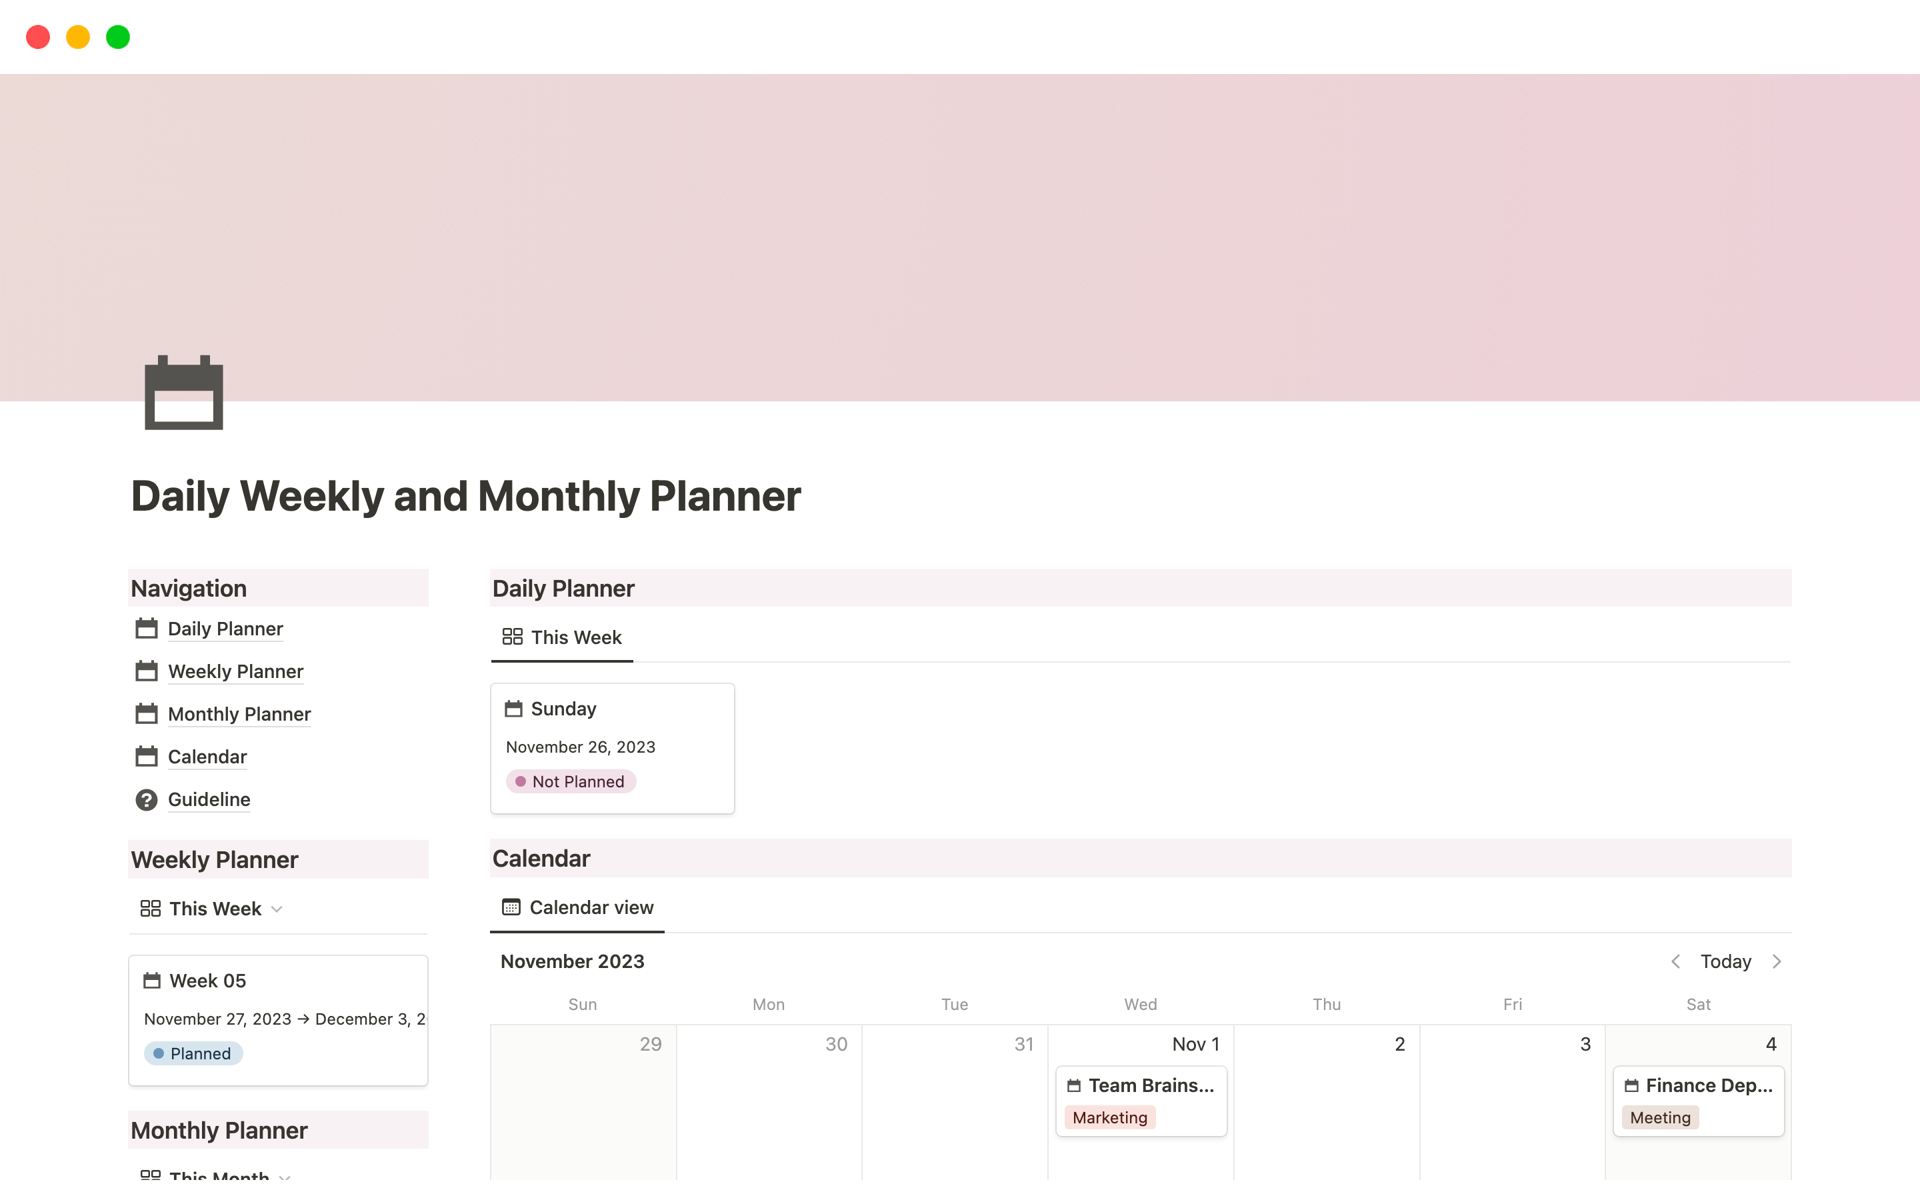 Aperçu du modèle de Daily Weekly and Monthly Planner